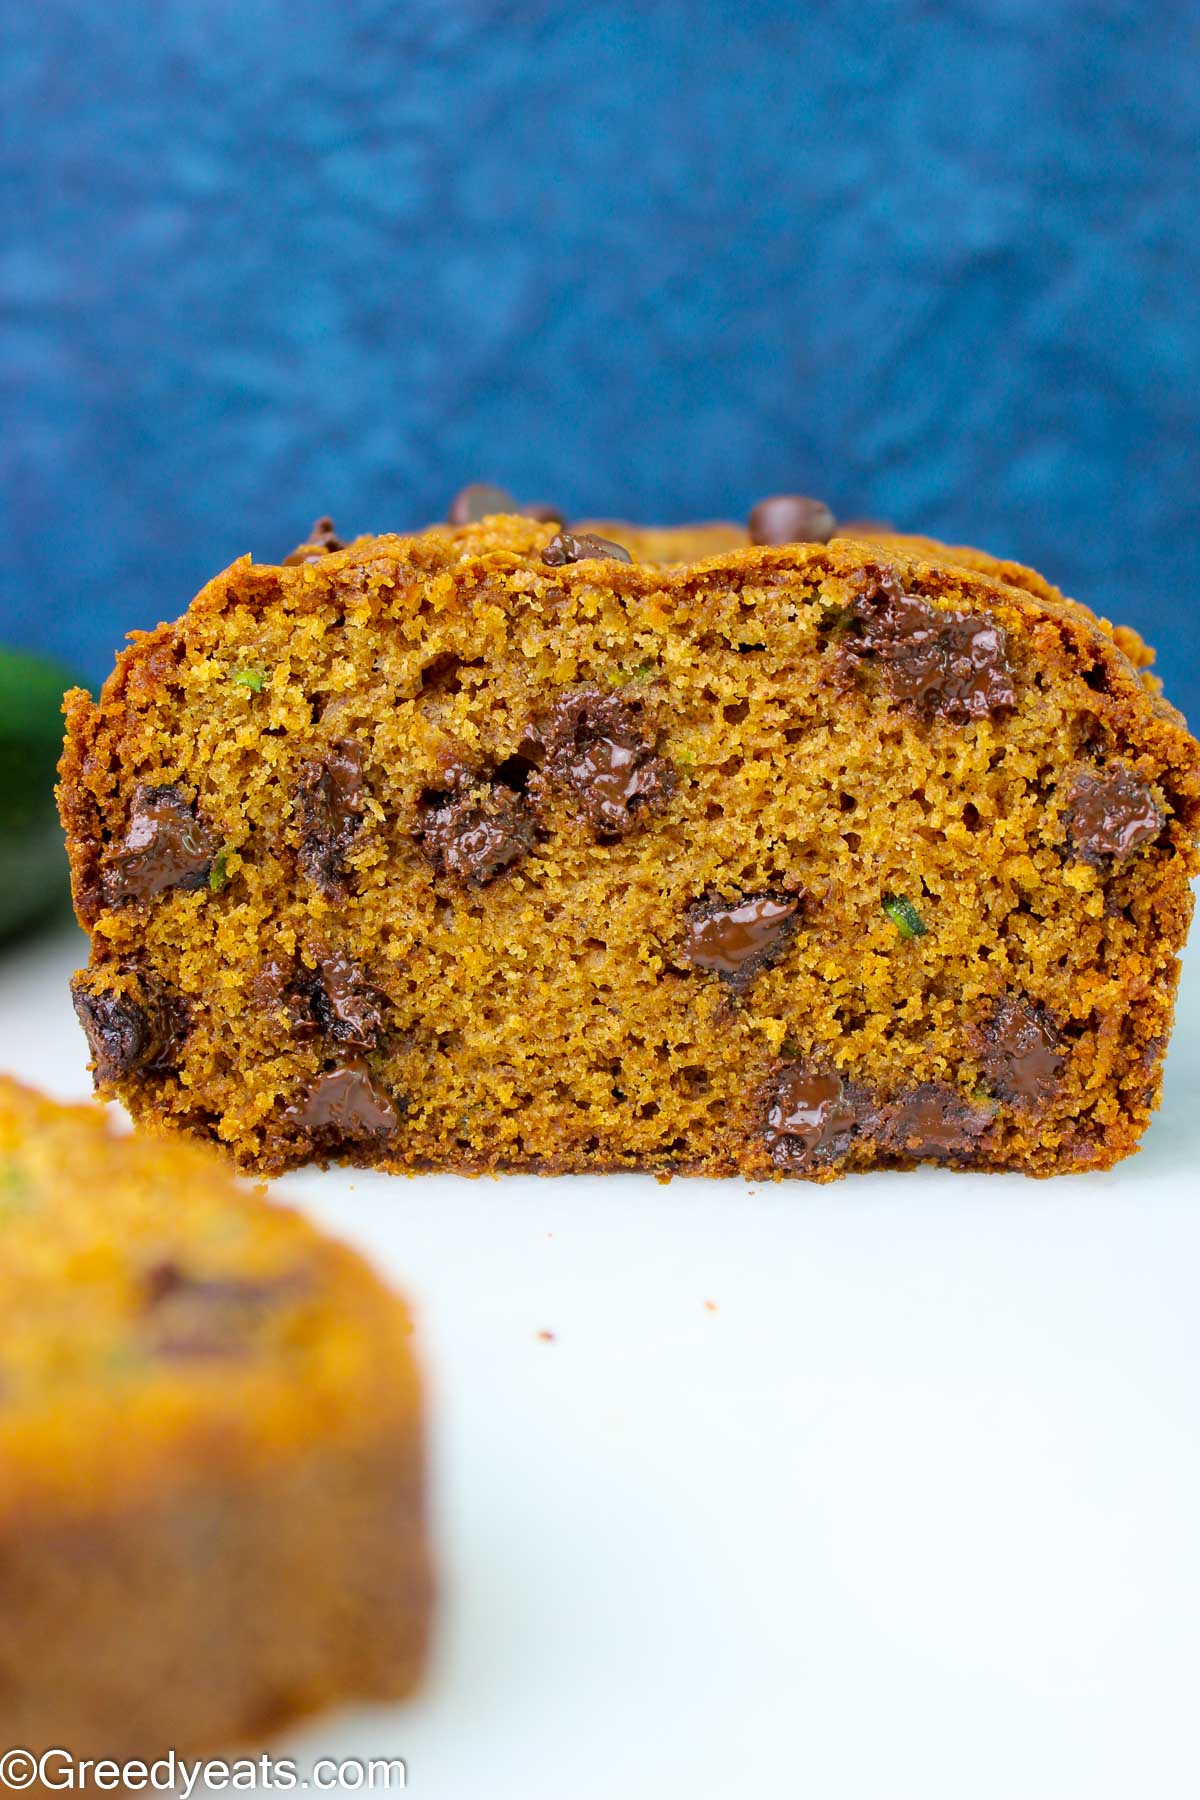 Easy Zucchini Bread made with brown sugar, spices and dotted with chocolate chips.